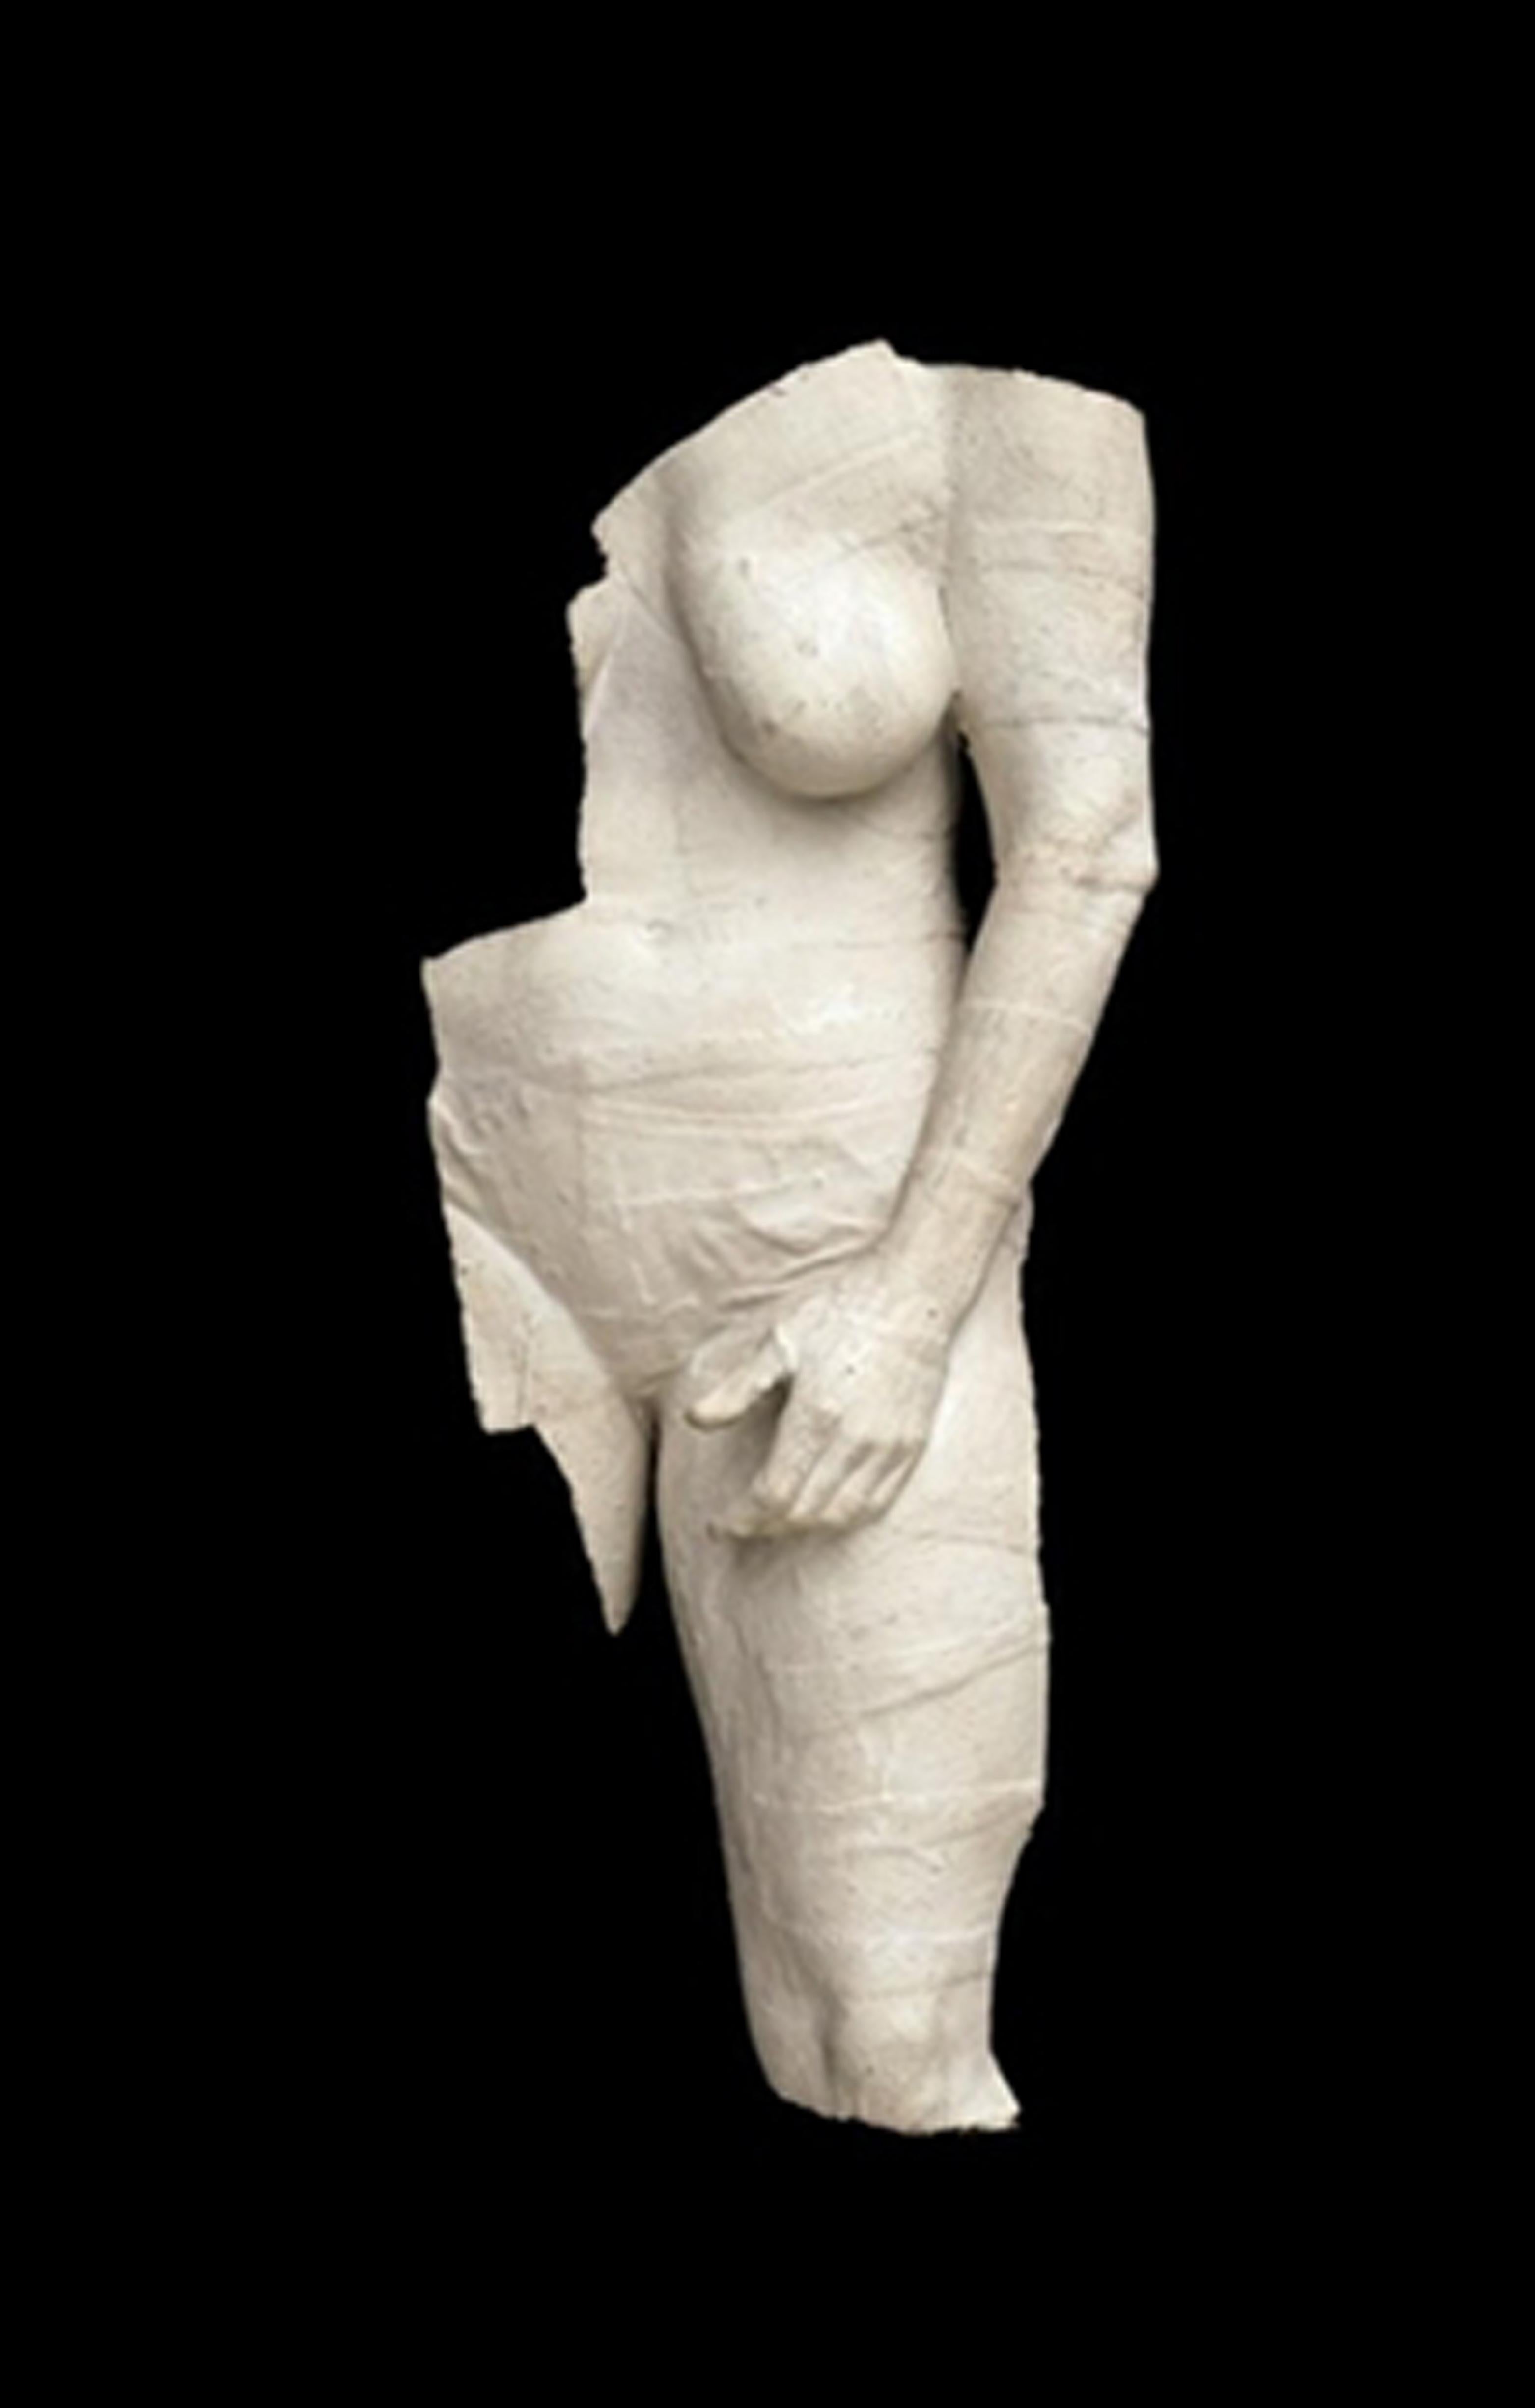 Untitled (Fragment) - Sculpture by George Segal